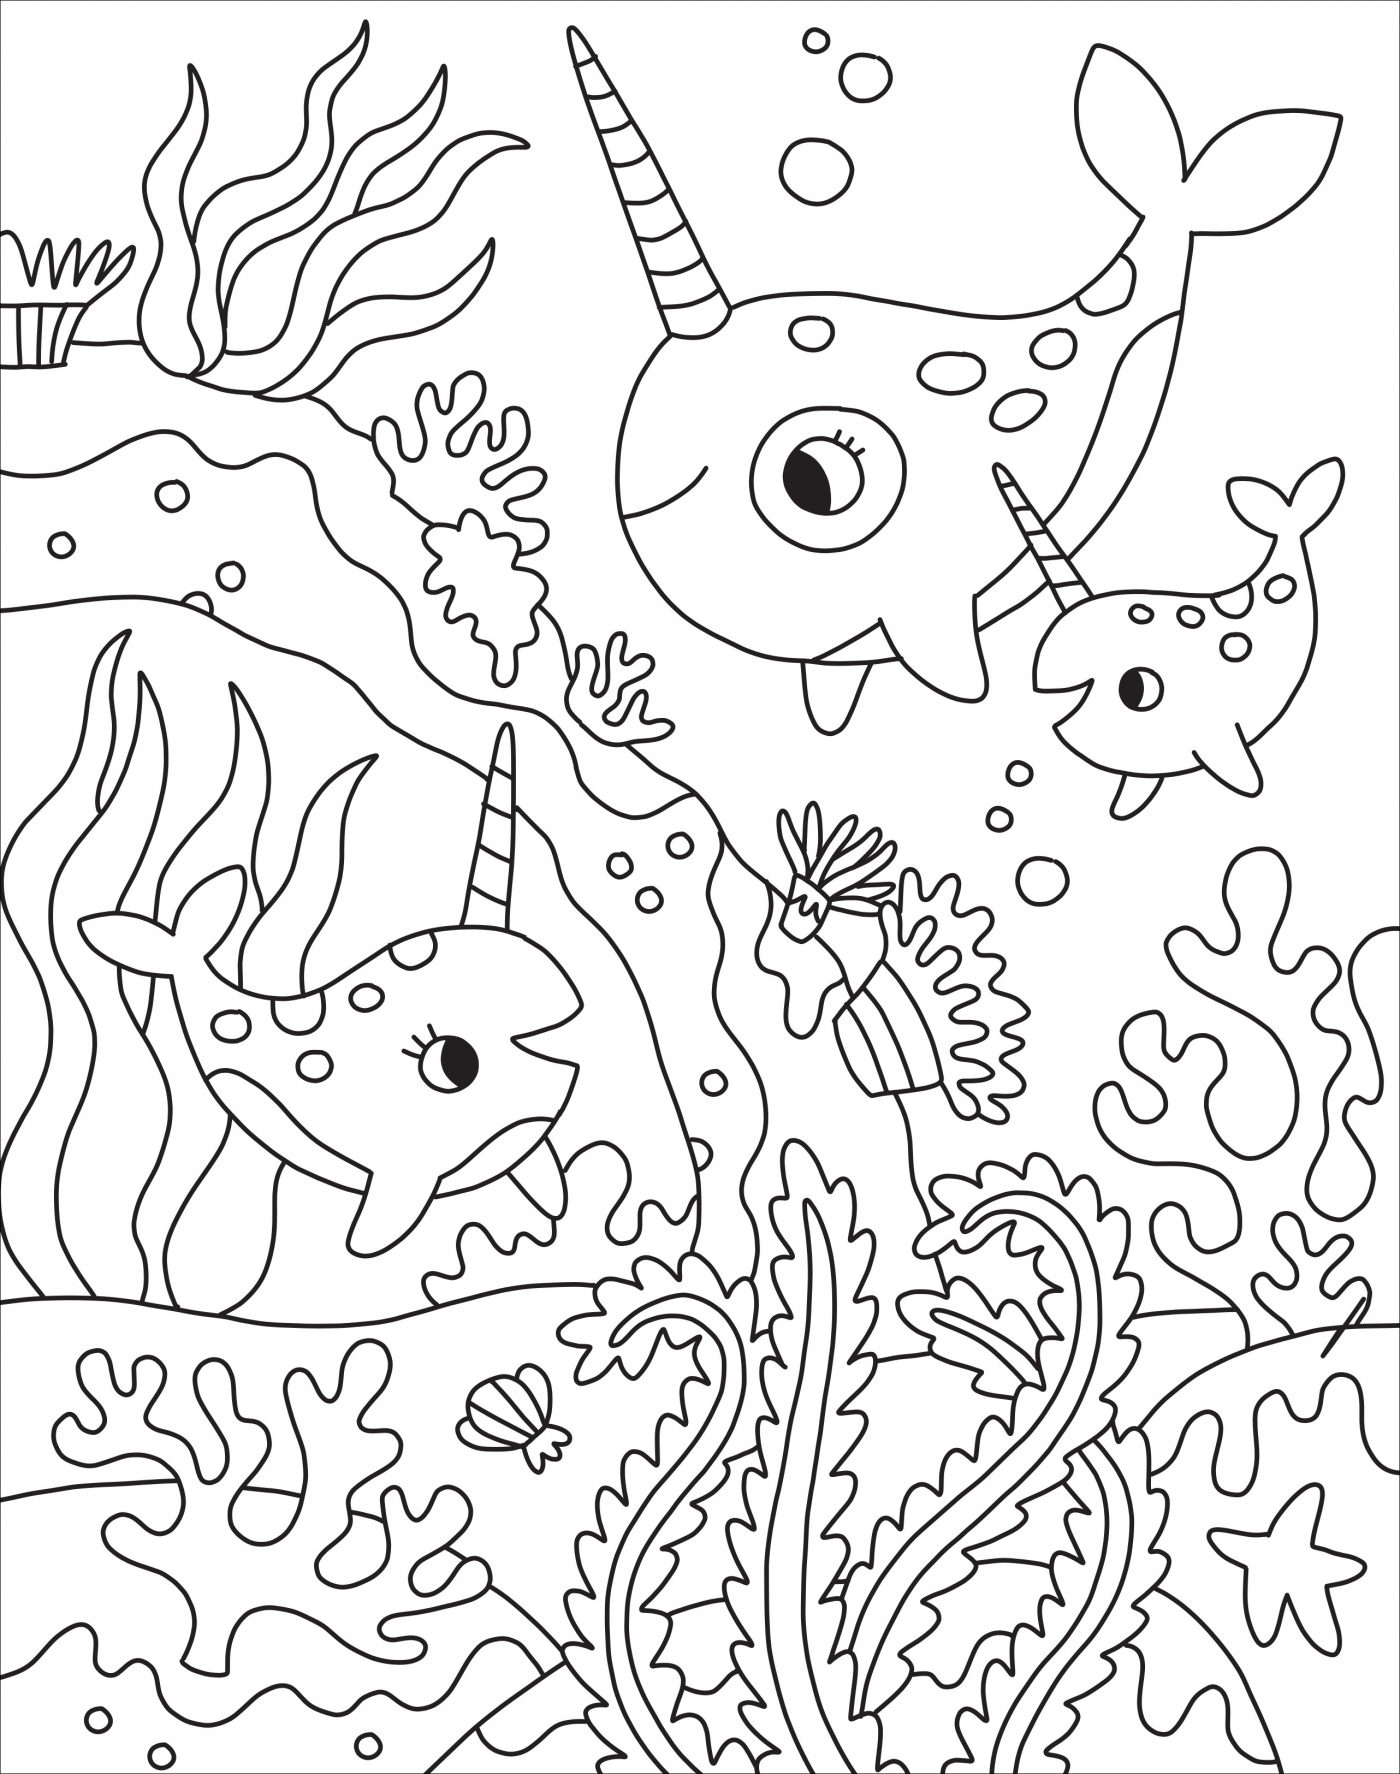 Kaleidoscope: Too Cute! Coloring Downloadable - Silver ...